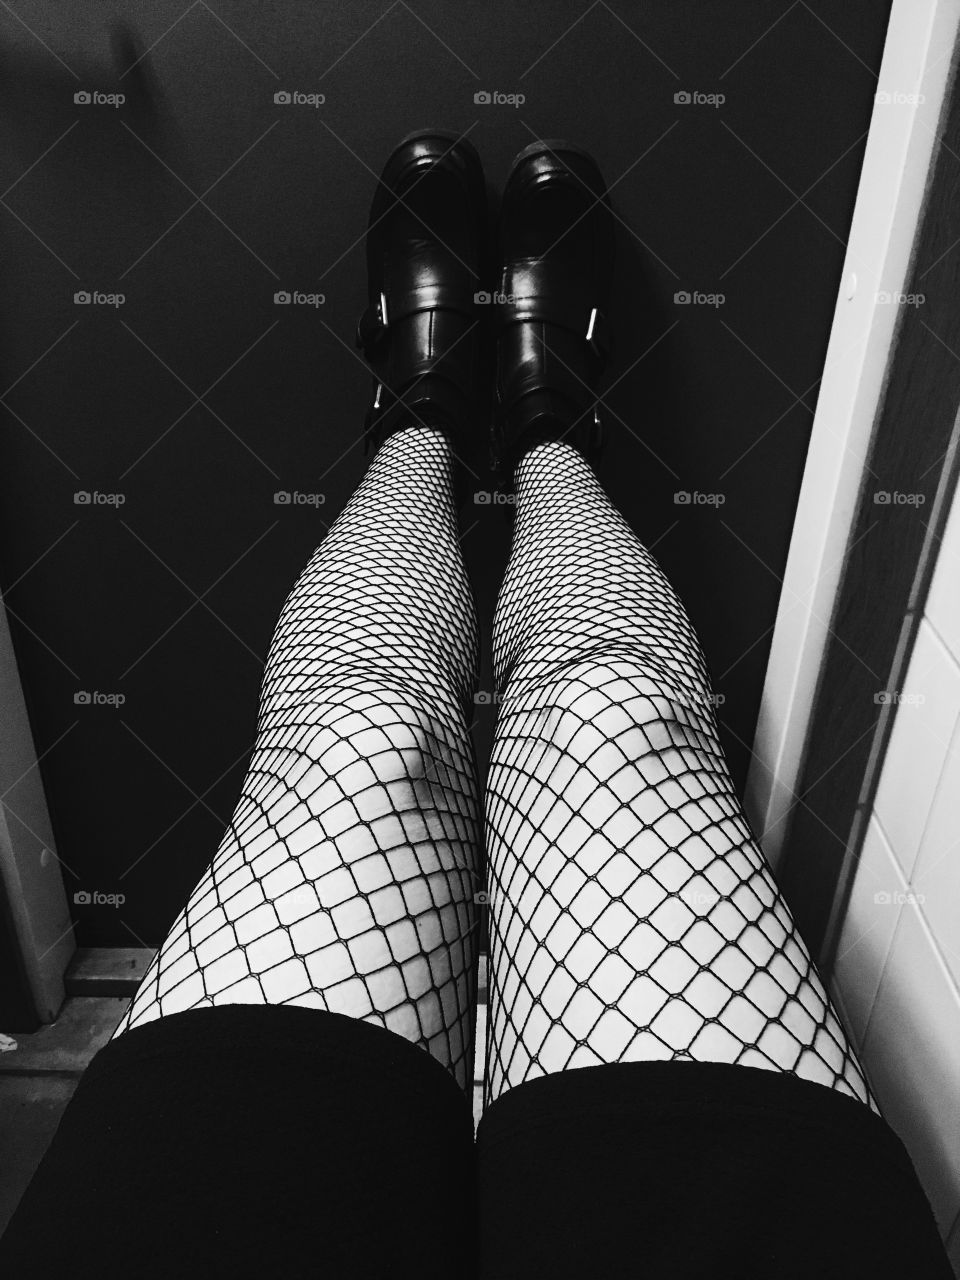 Fishnet stockings and boots on a girls legs